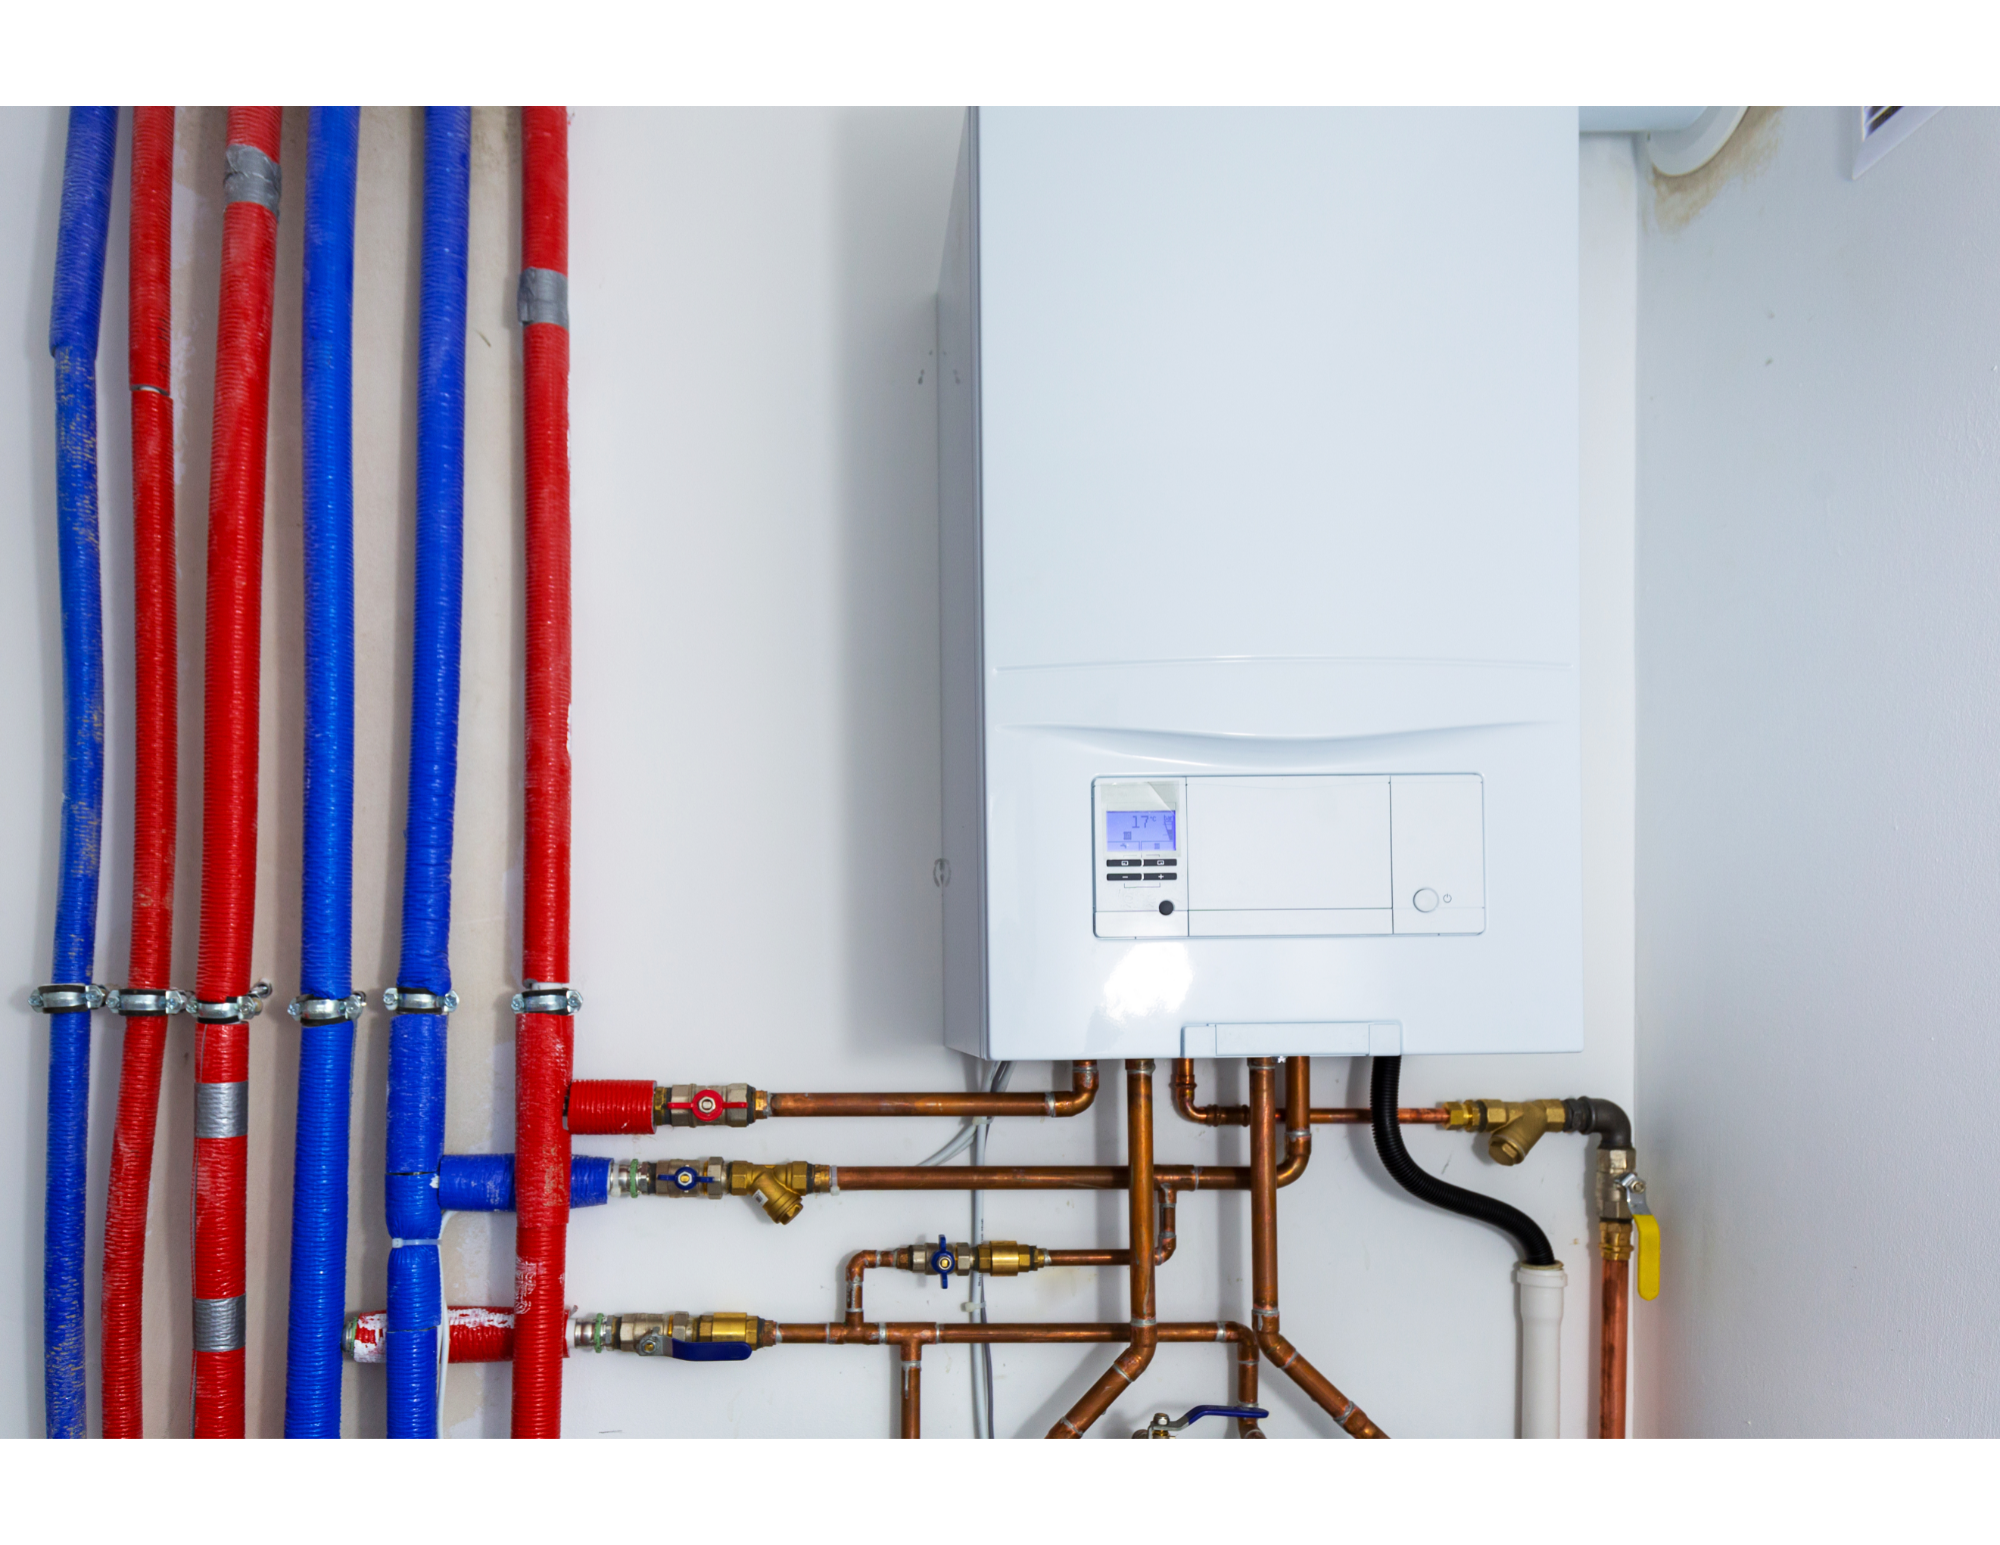 Contact us to keep your heating system maintained.